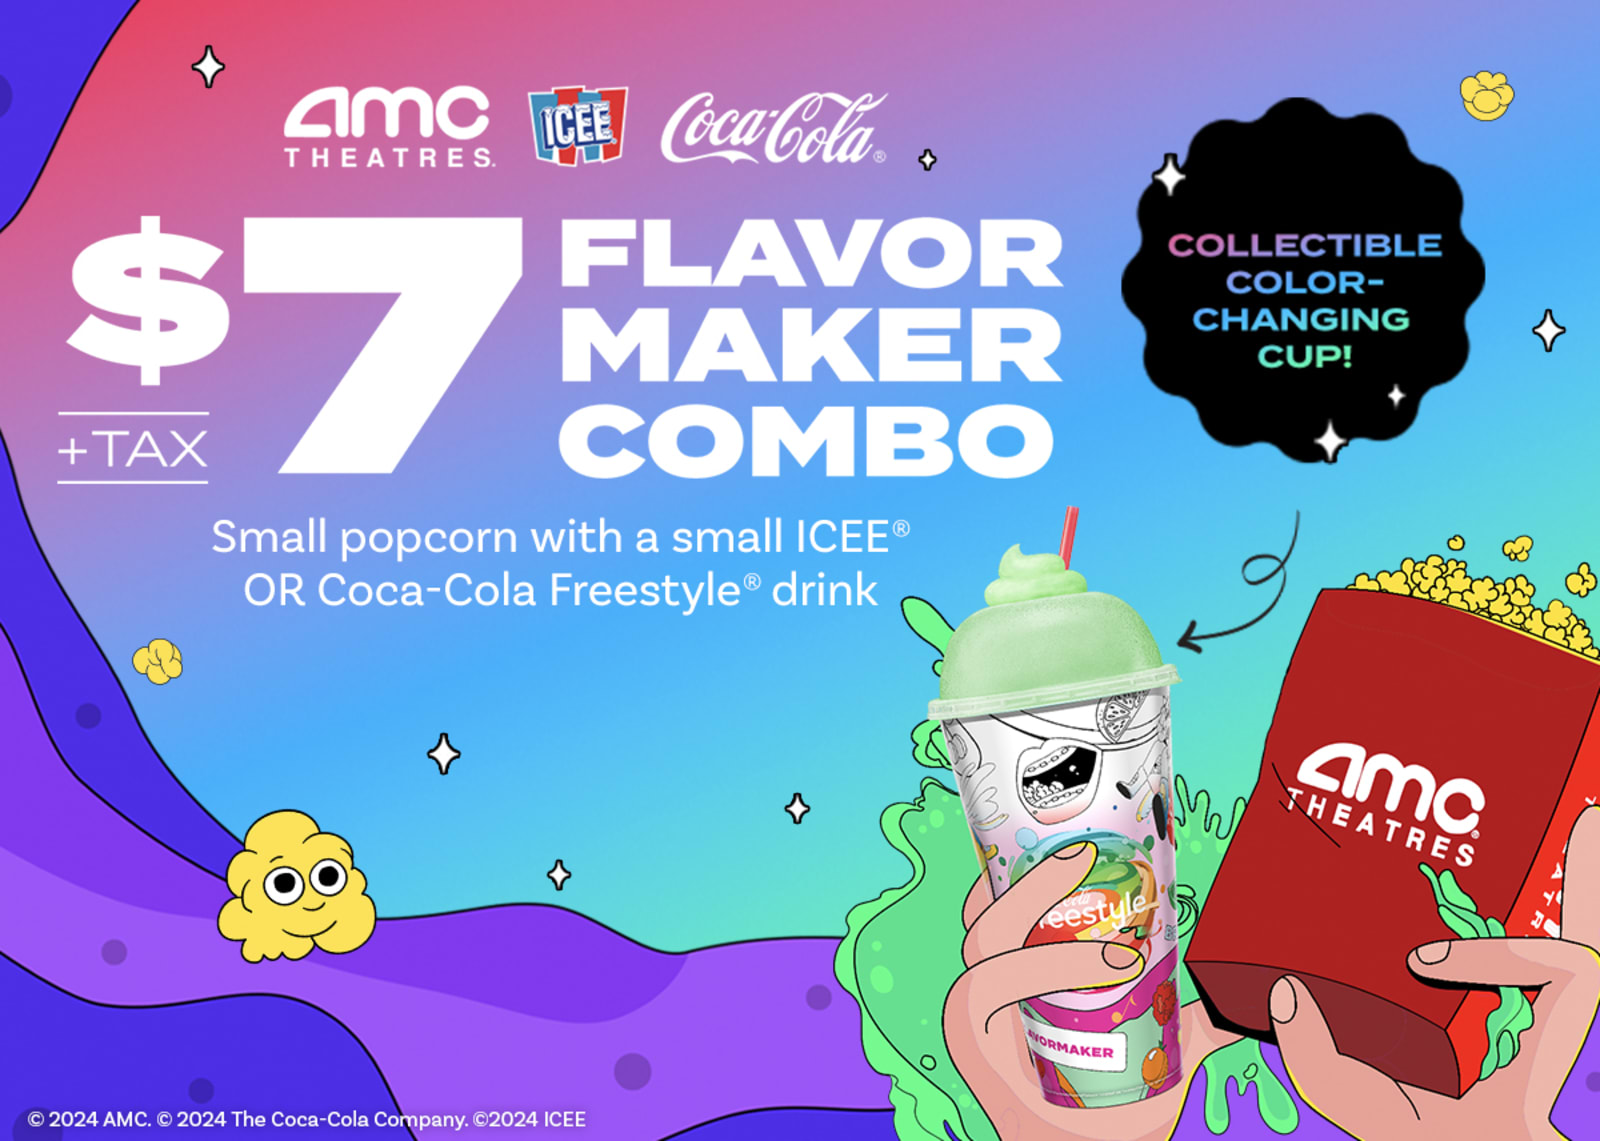 AMC Theatres: Small Popcorn + Small ICEE or Coca-Cola Freestyle Drink in Color Changing Cup for $7 (Must show Student ID)